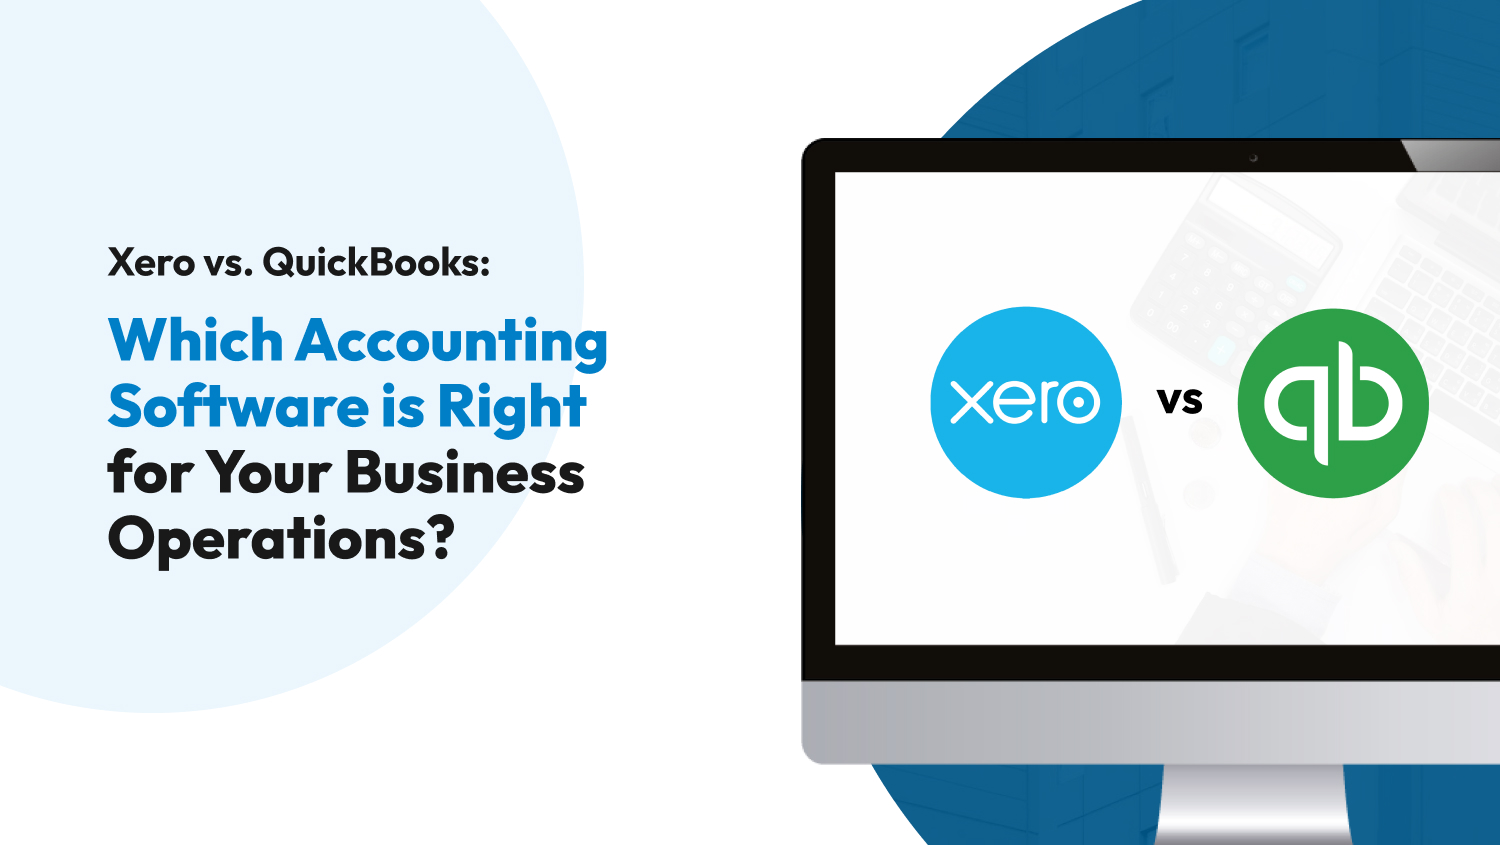 Xero vs. QuickBooks: Which Accounting Software is Right for Your Business Operations?